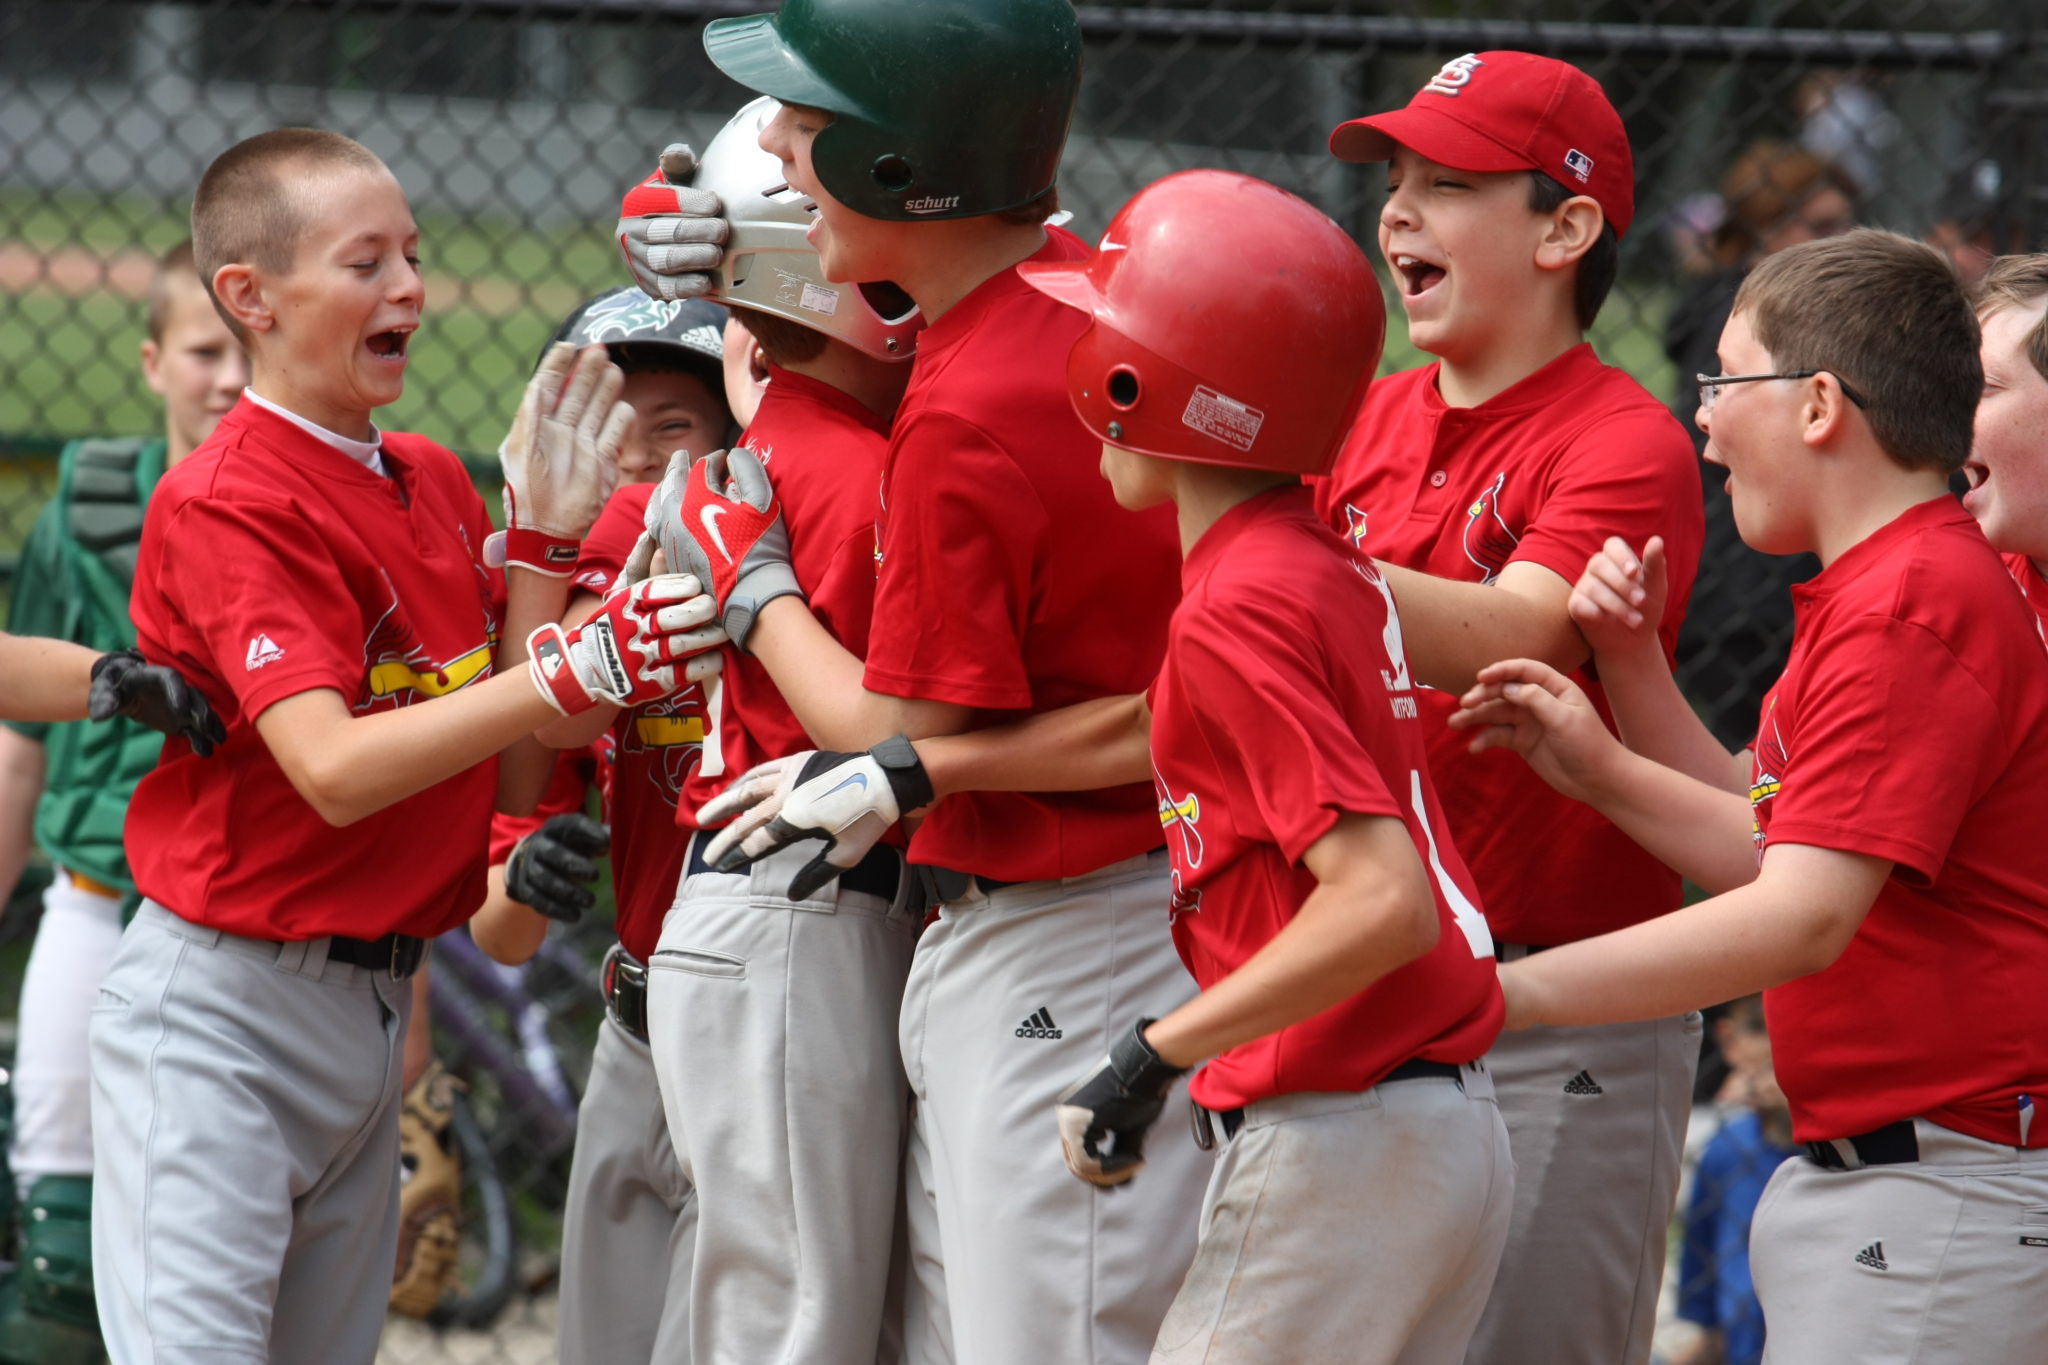 Register now for fall baseball camps!  Zionsville Little League